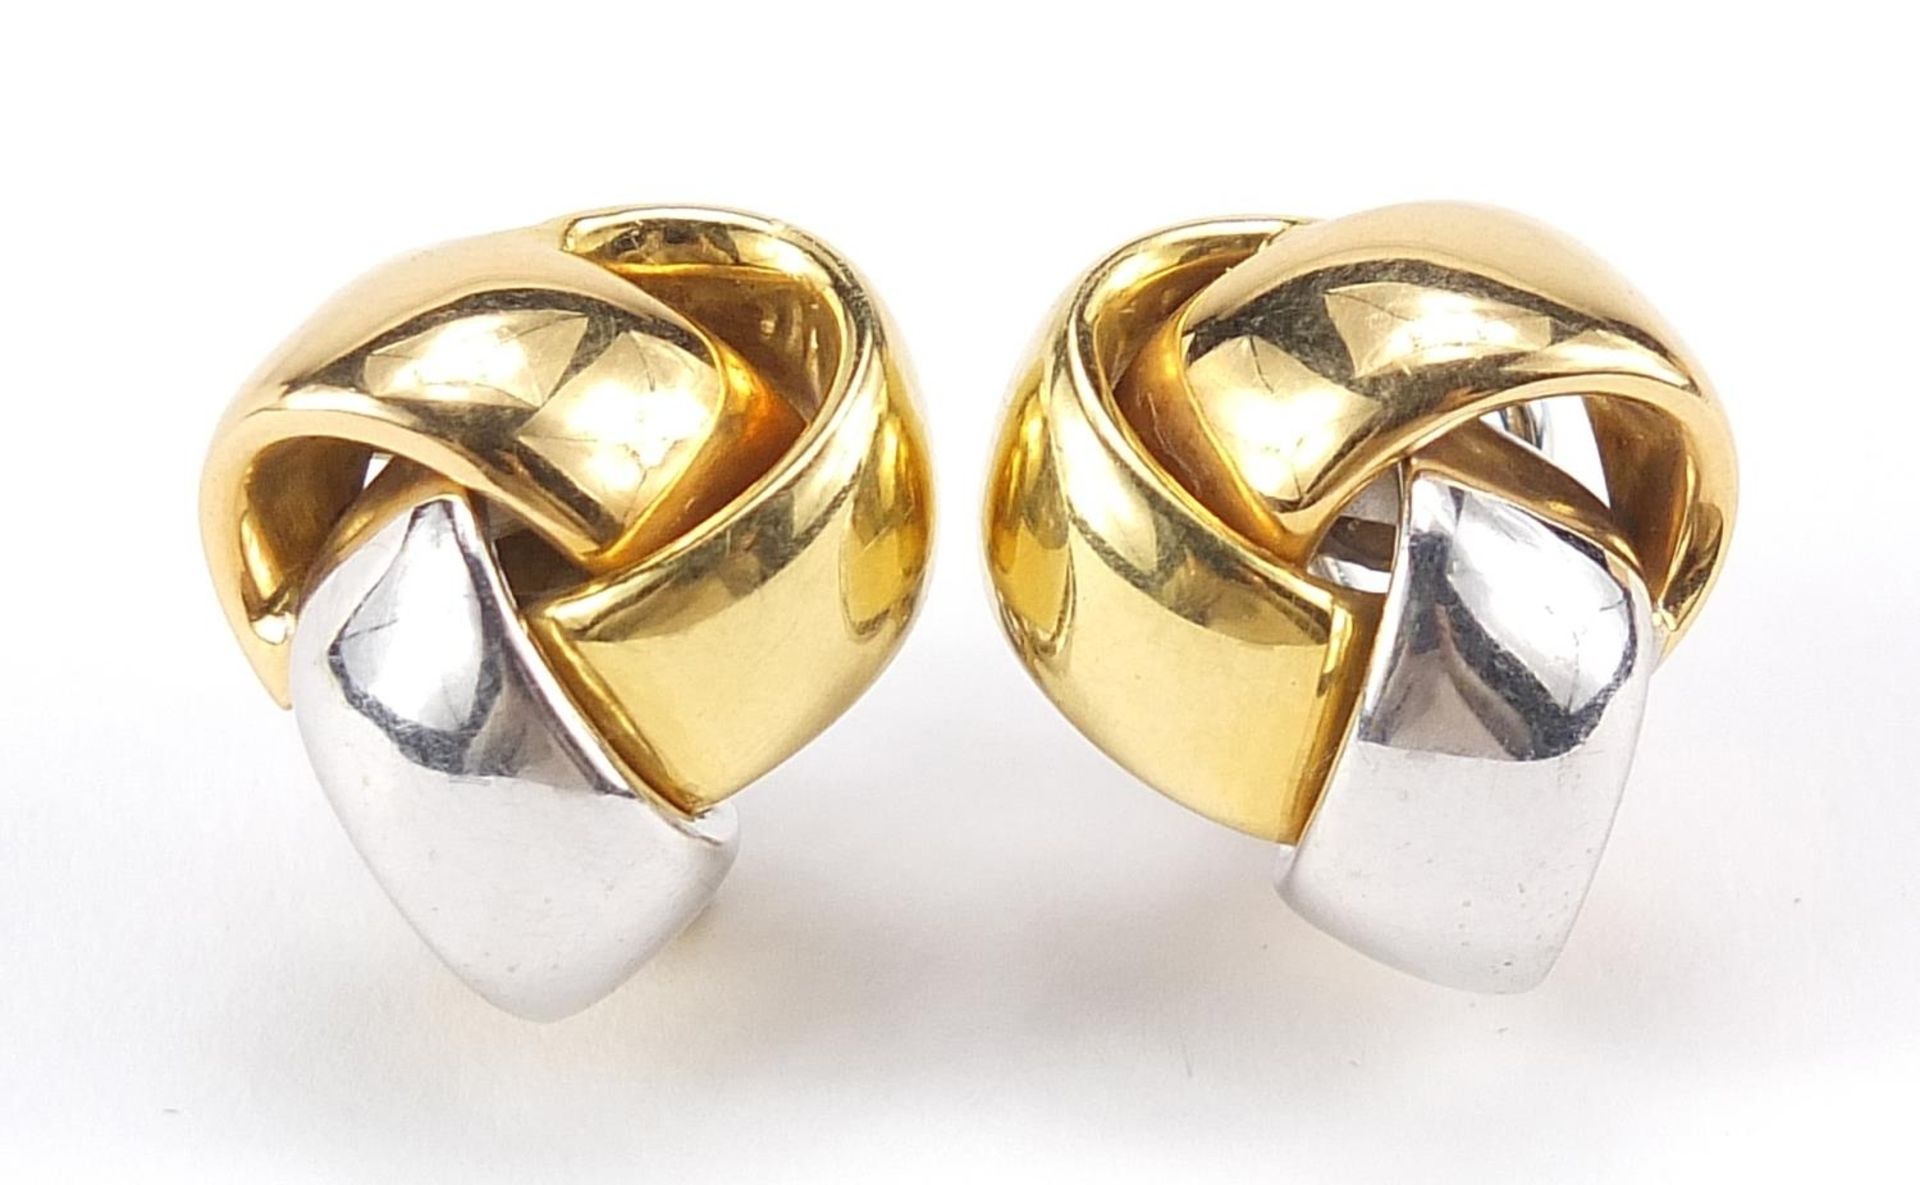 Pair of 18ct two tone gold knot earrings, 2cm high, 12.0g